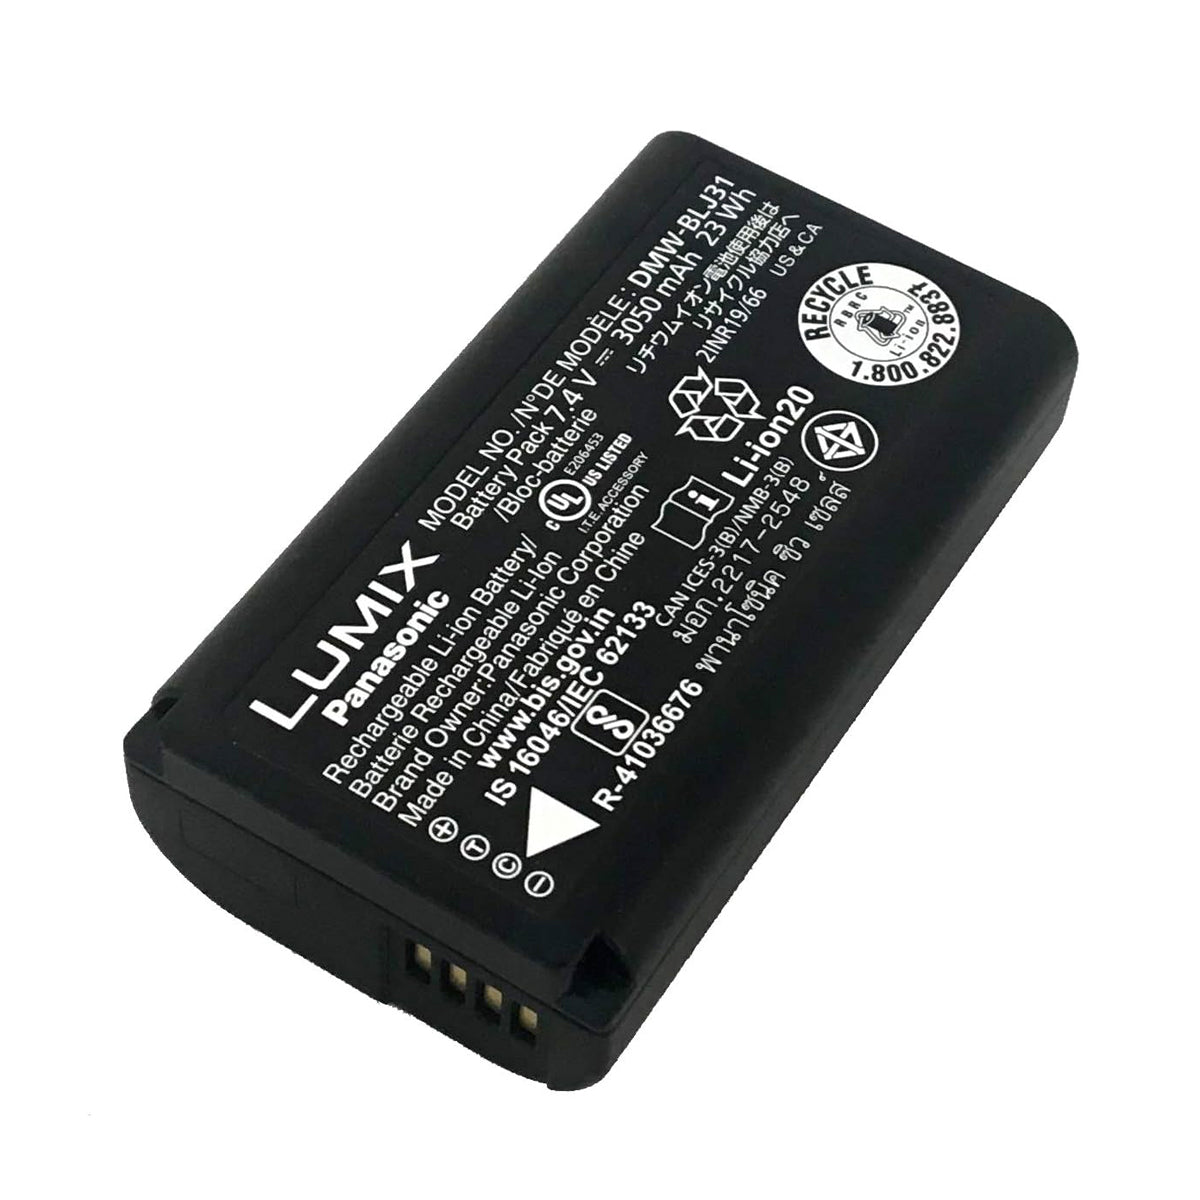 Panasonic LUMIX Rechargeable Lithium-Ion Battery - DMW-BLJ31PP